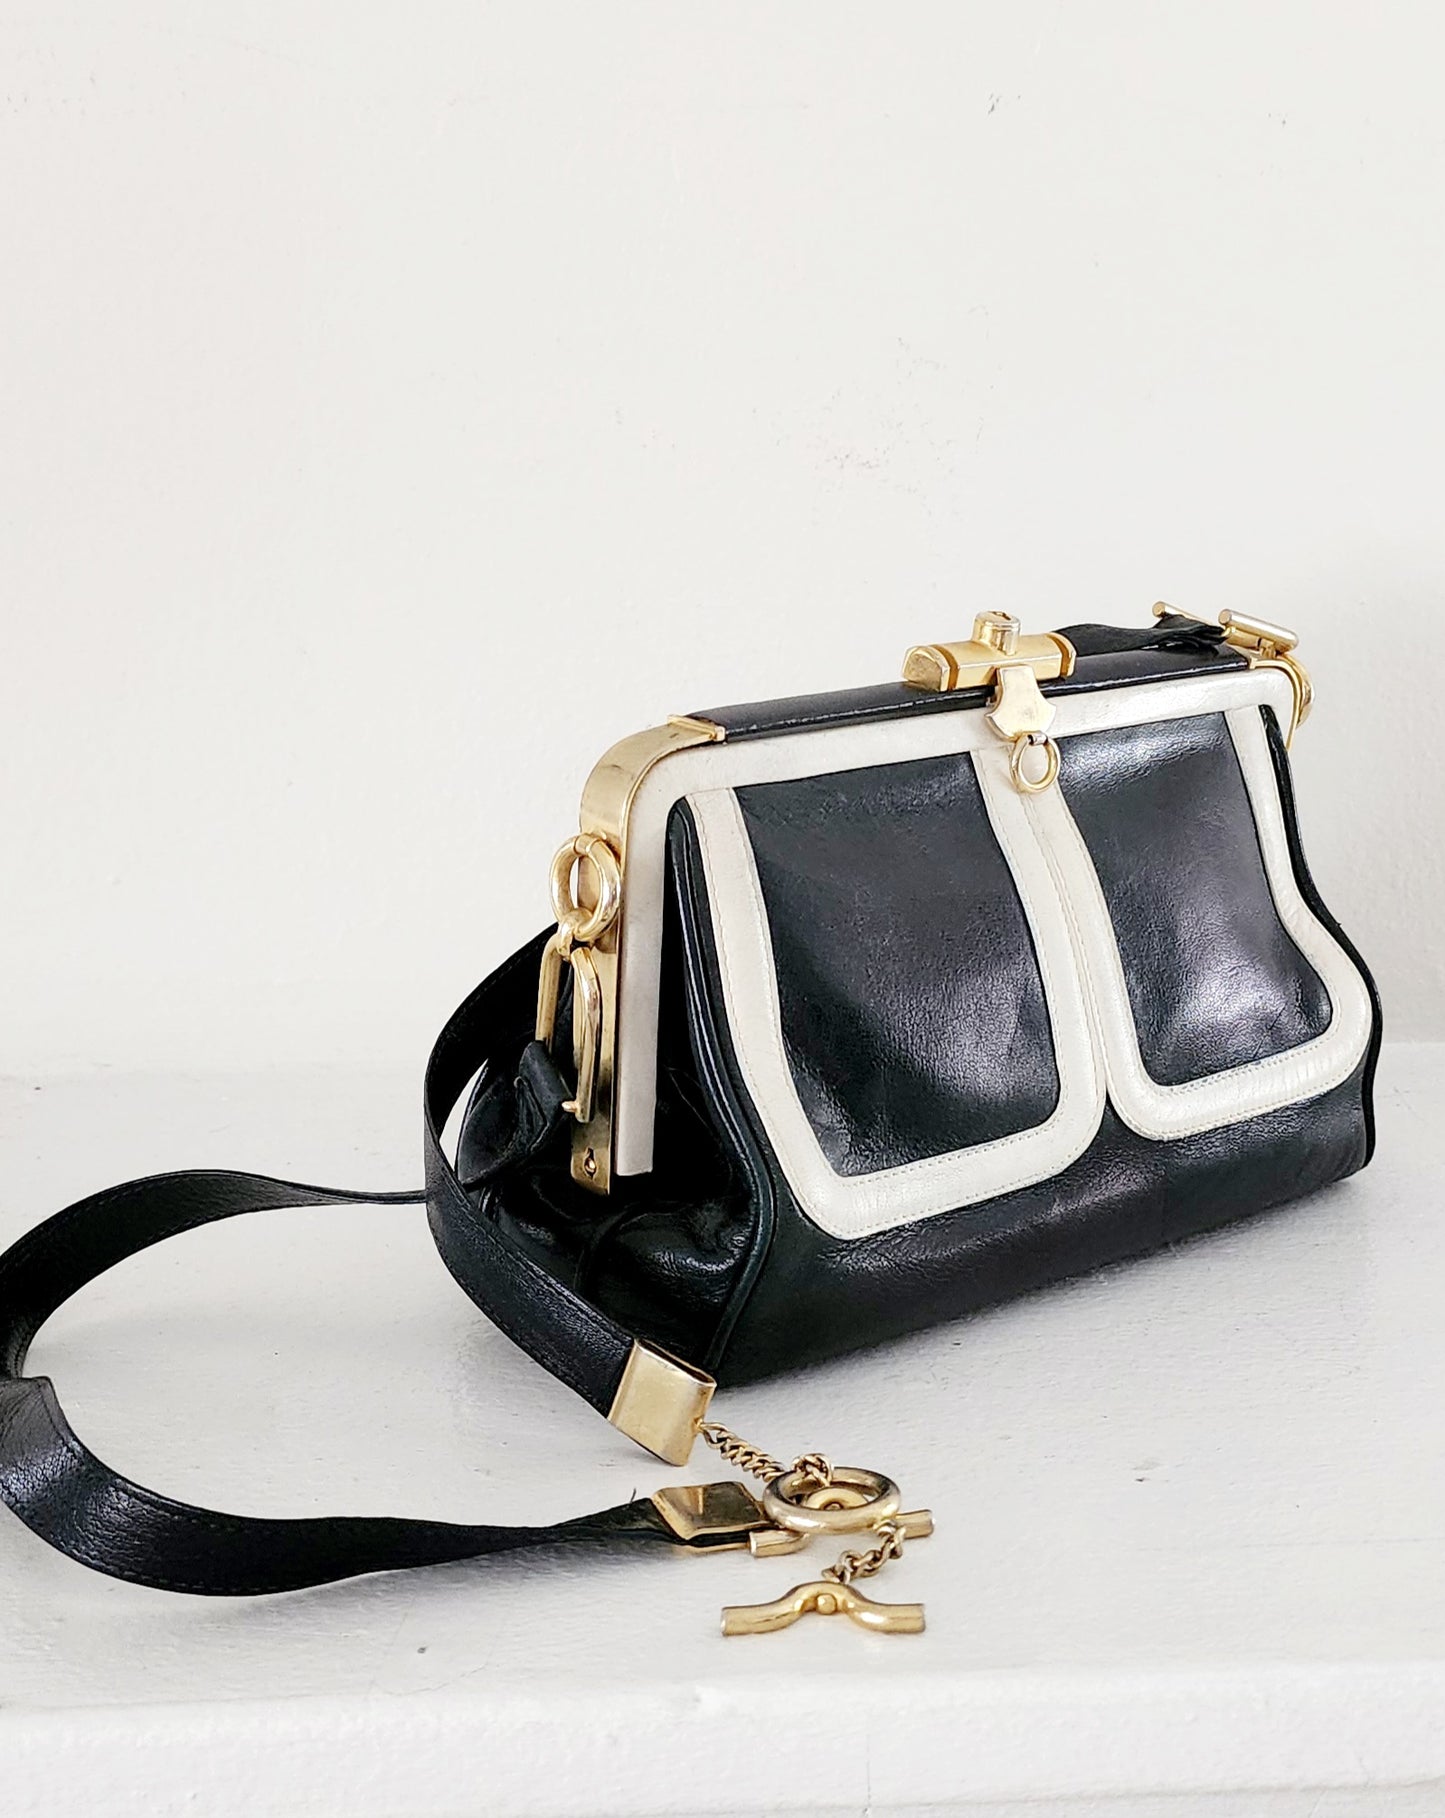 80s Black & White Leather Satchel Bag by Zenith Made in Italy